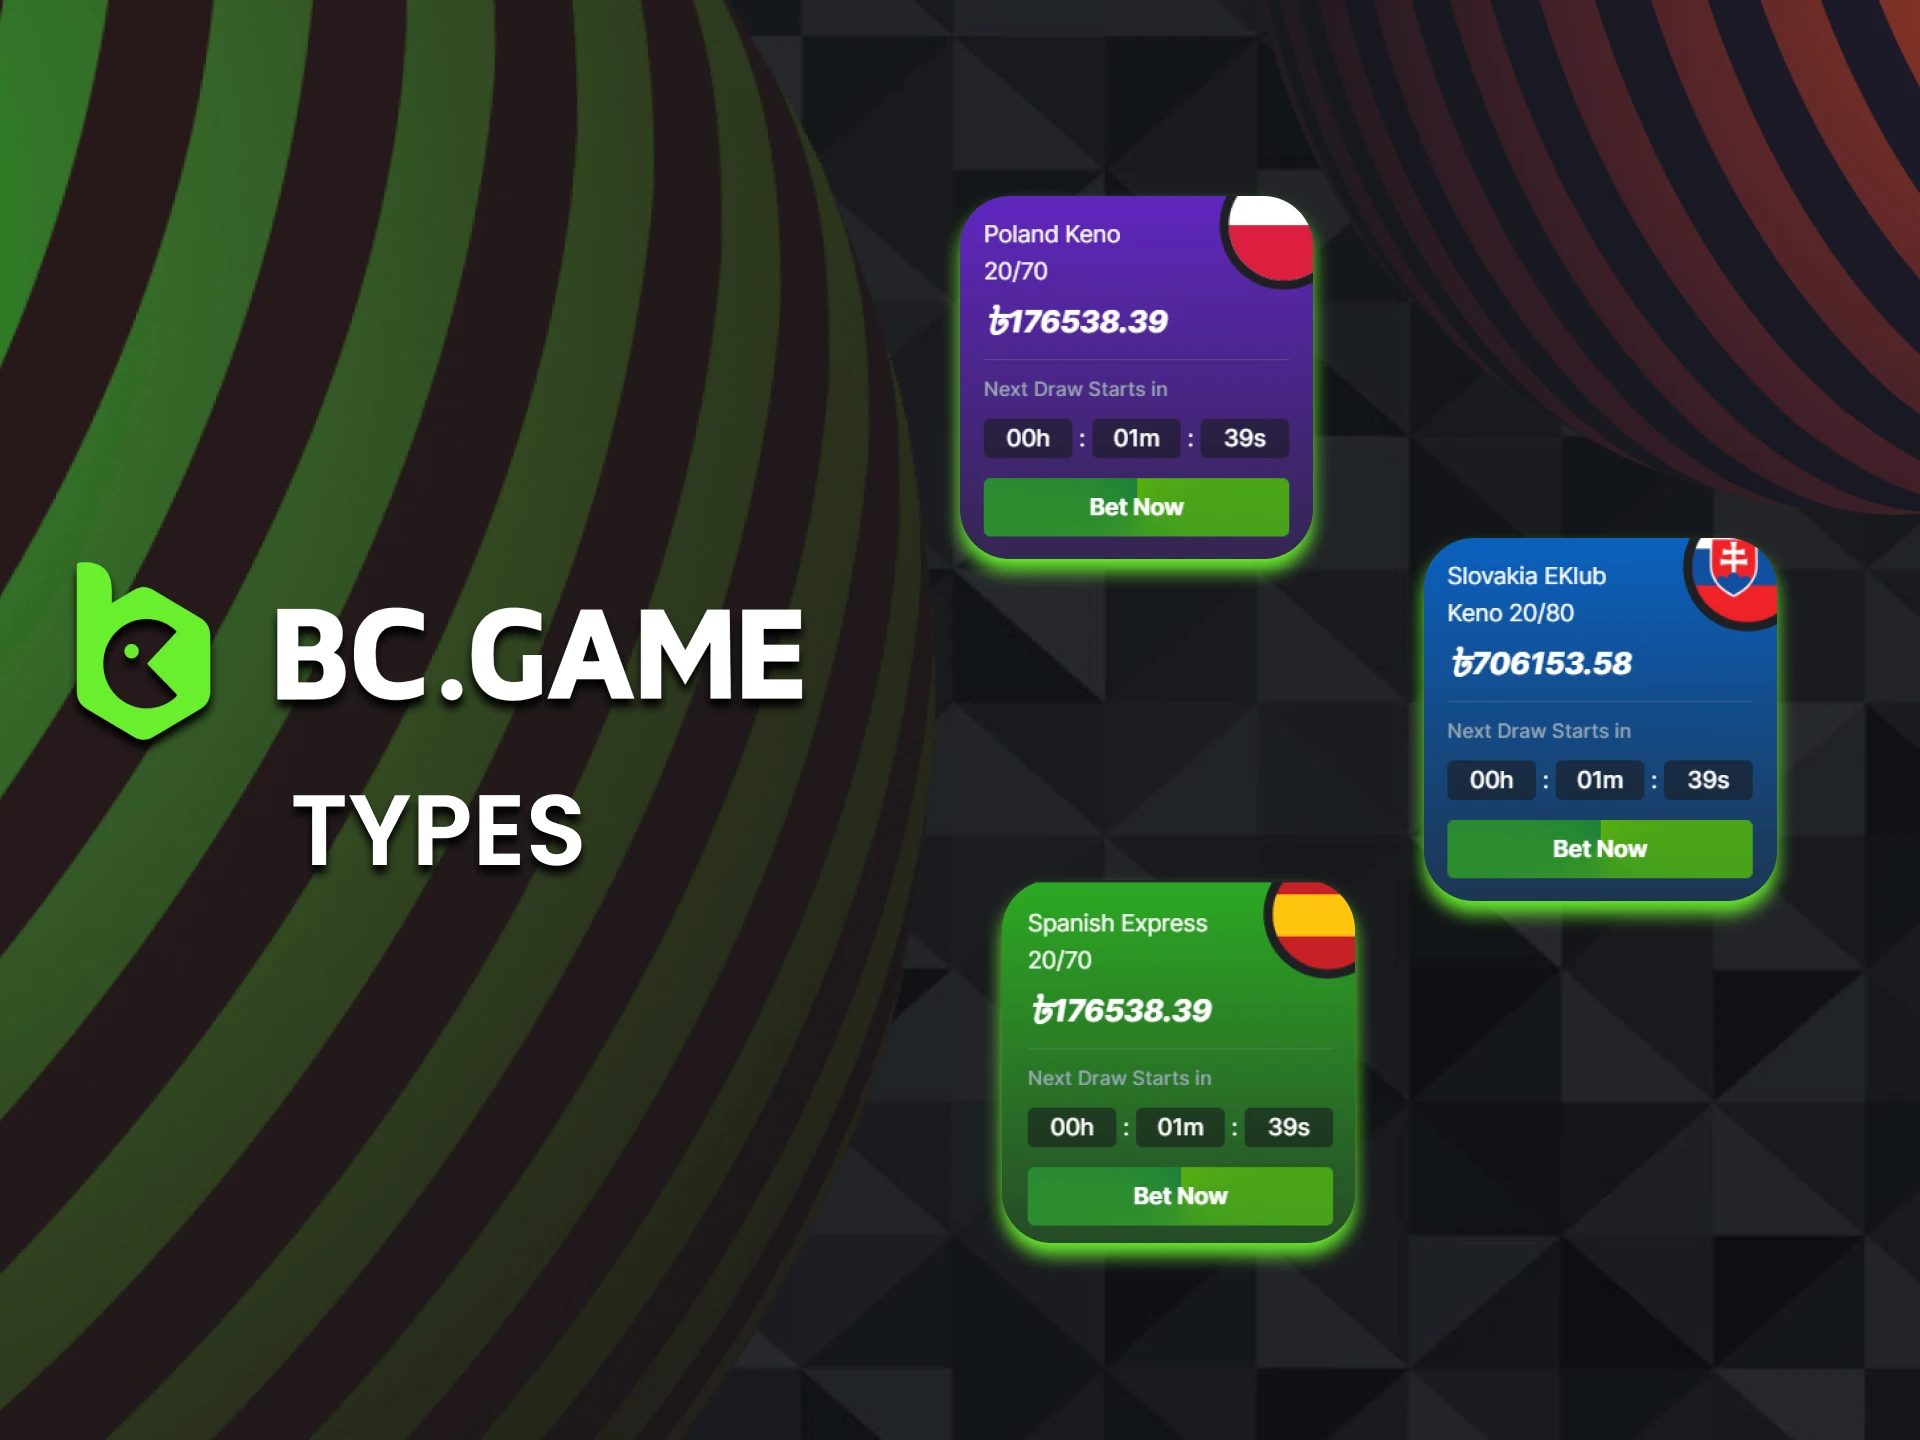 We will tell you what types of lotteries are available on BC Game.